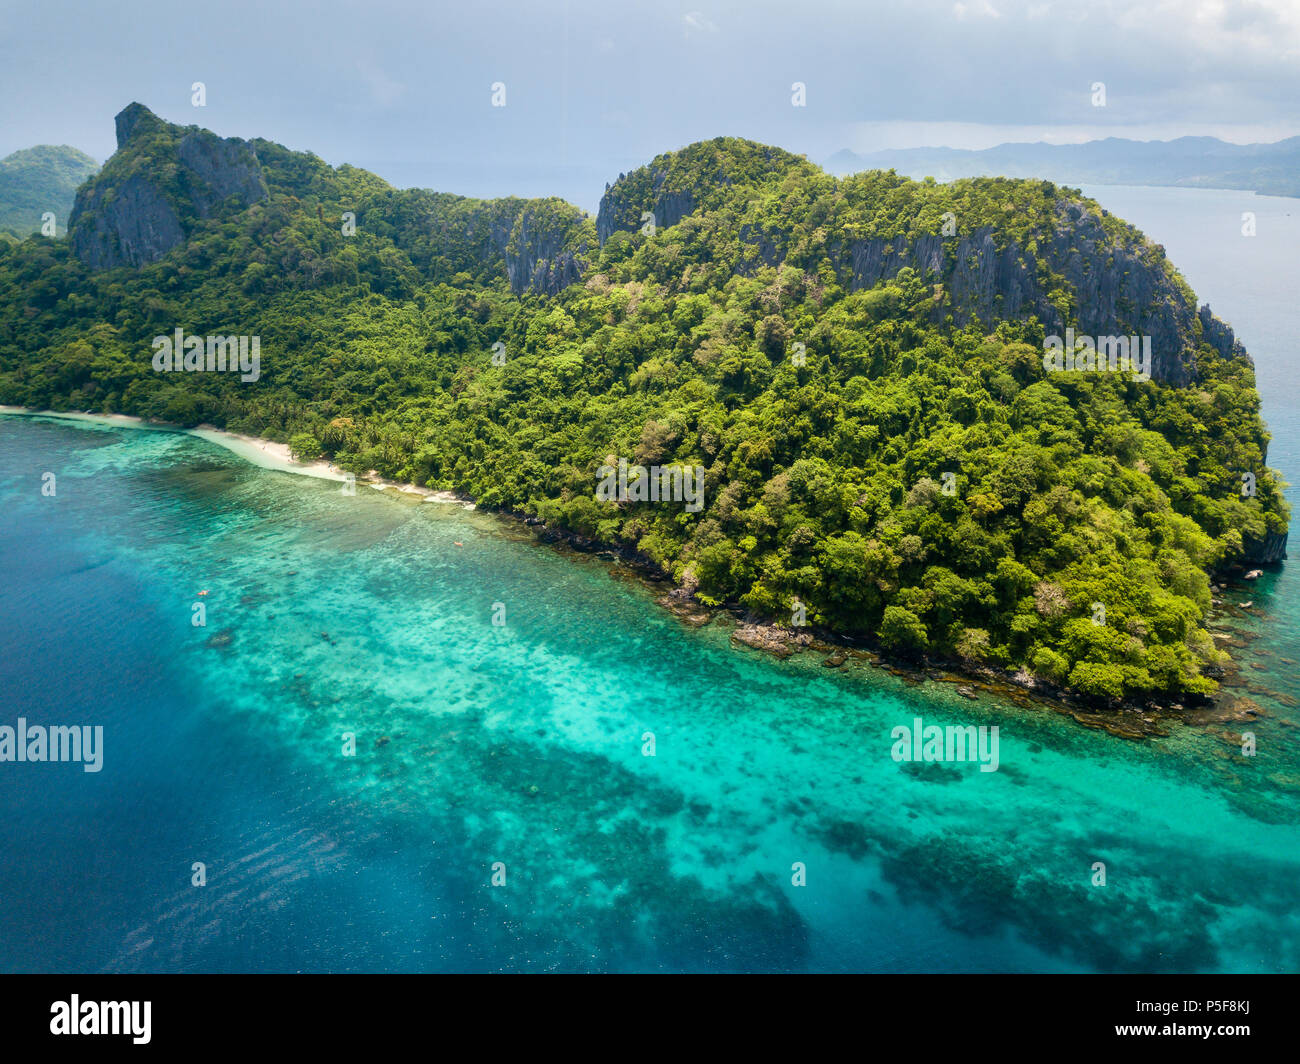 Aerial drone view of an unihabited tropical island with rugged mountains, jungle and sandy beaches Stock Photo